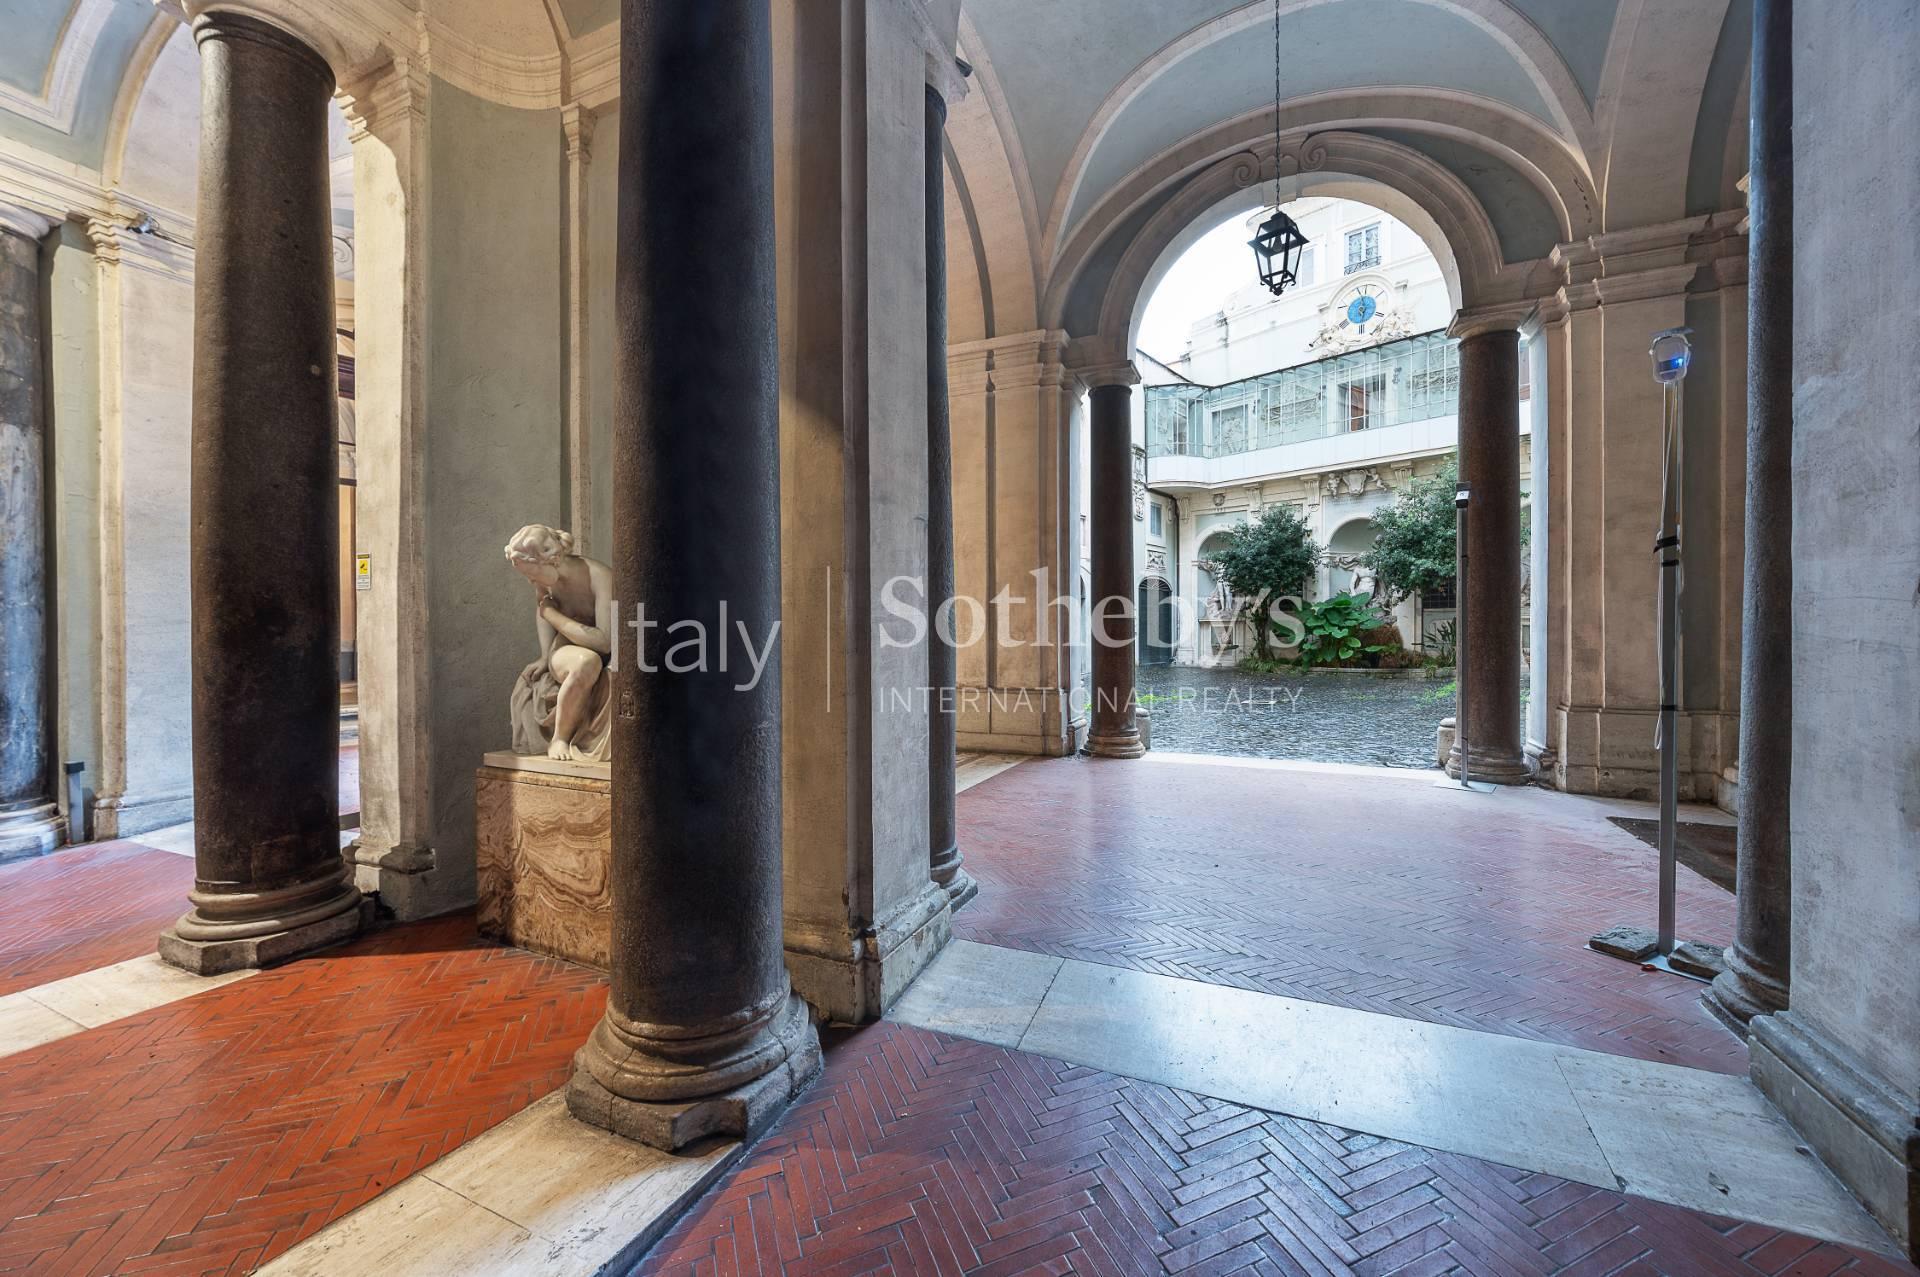 Palazzo Rondinini, historical building in the heart of Rome - 7